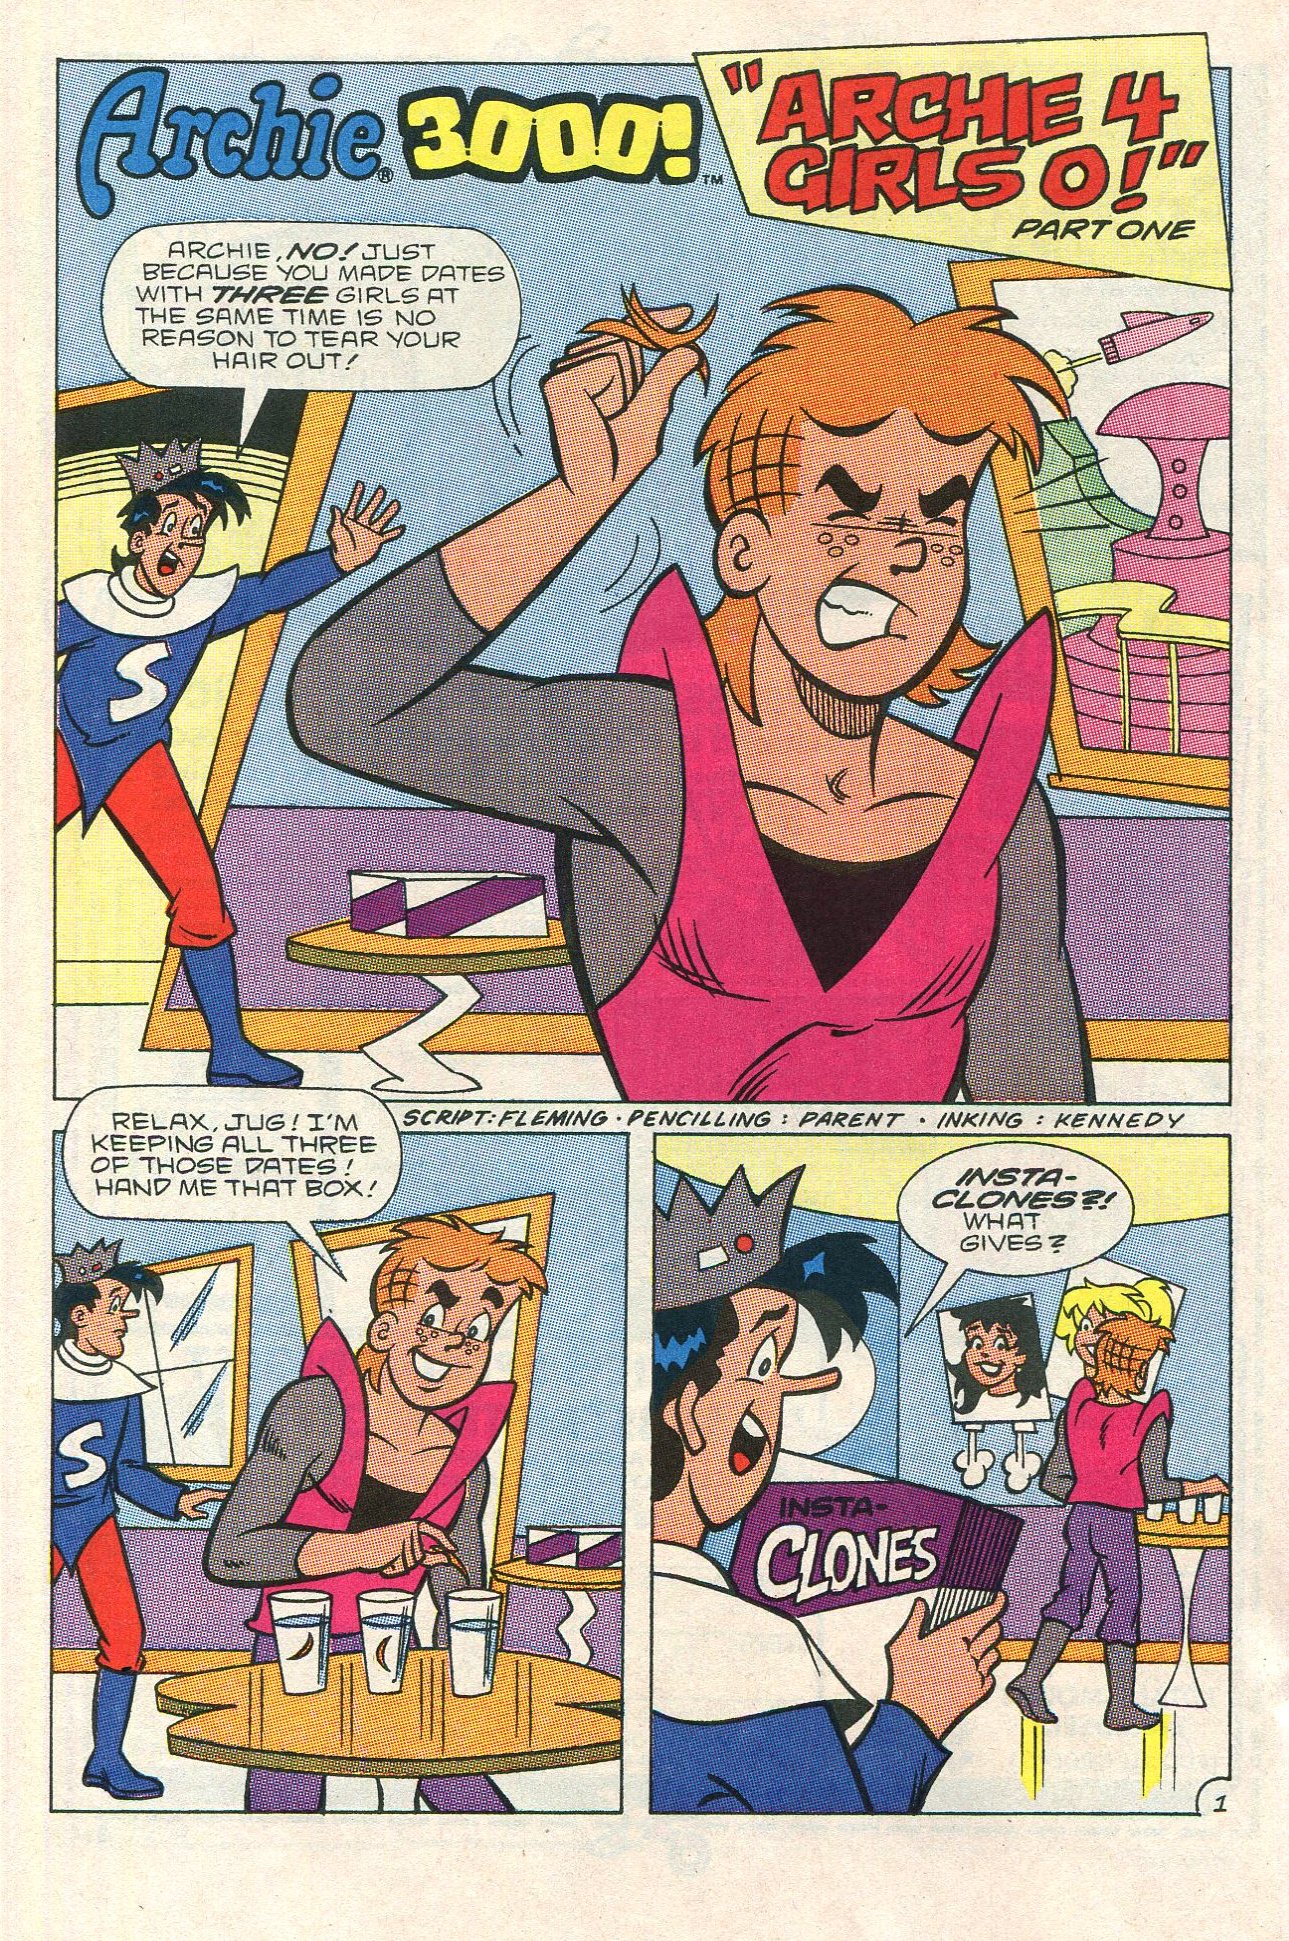 Read online Archie 3000! (1989) comic -  Issue #16 - 20